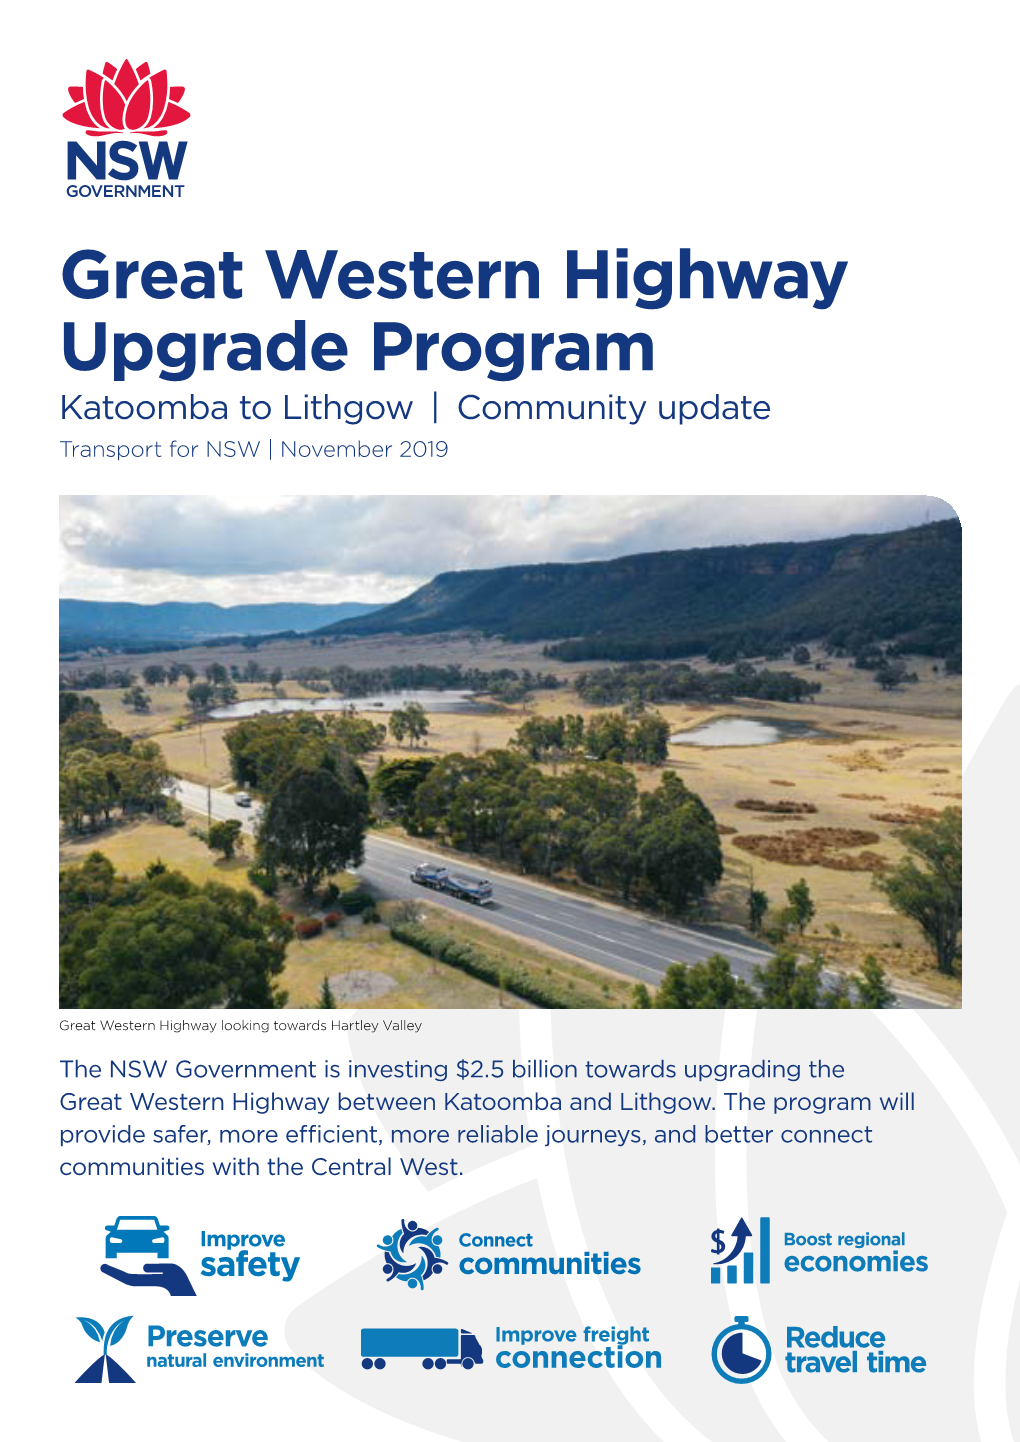 Great Western Highway Upgrade Program Katoomba to Lithgow | Community Update Transport for NSW | November 2019